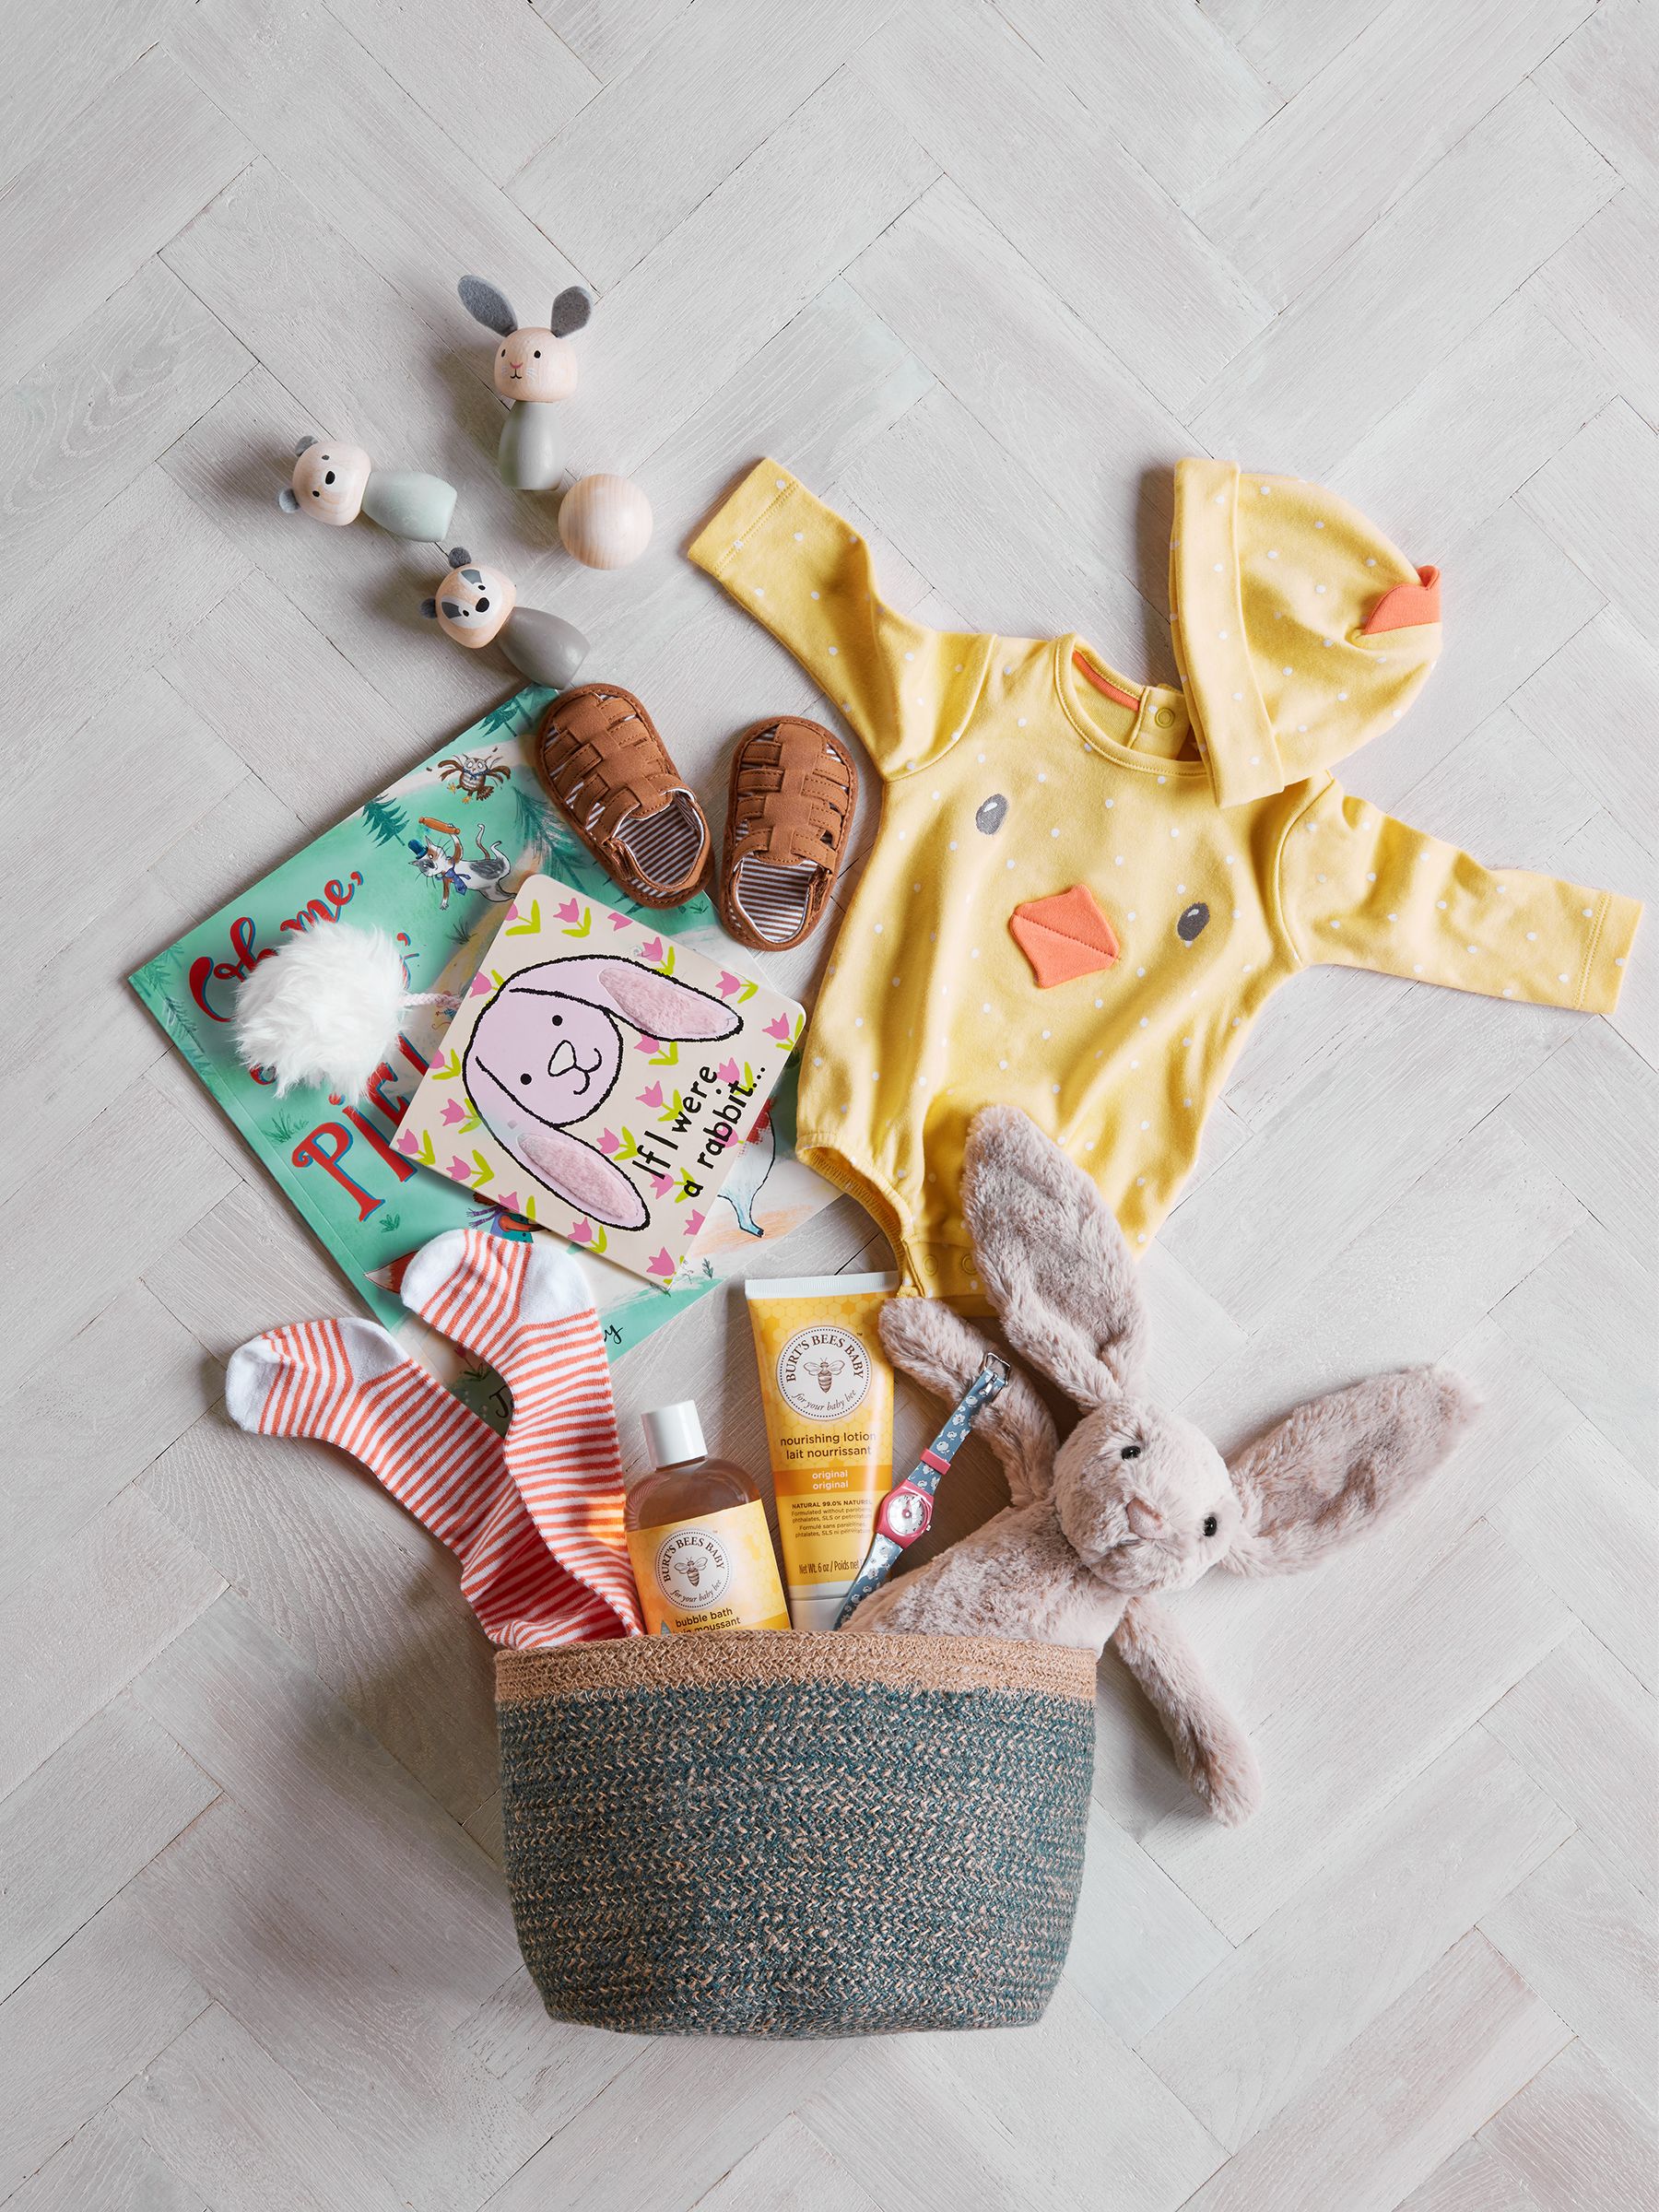 Easter Gift : Amazon Com Baby S My First Easter Basket Playset Baby Gund Health Personal Care - 35 easter gifts to make the holiday even sweeter.